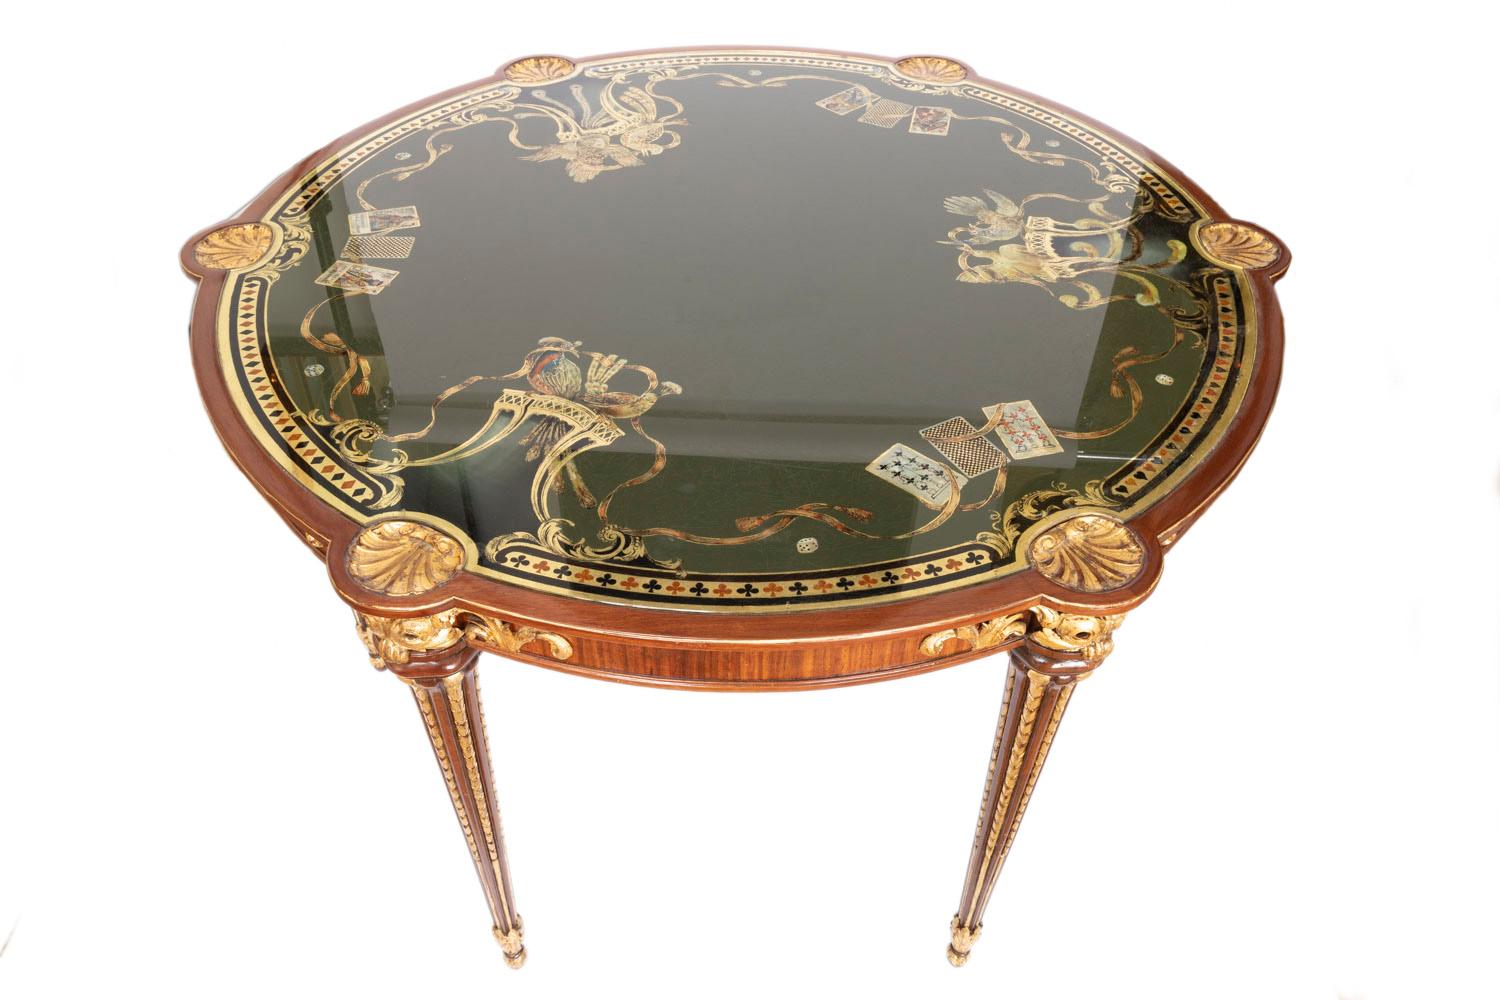 Pere Cosp i Villaro, stamped.

Circular Louis XVI style game table in veneered bloodwood, gilt highlights standing on four tapered, fluted legs with gilt chandelles and ending with carved and gilt acanthus leaves. Apron adorned beneathe every legs